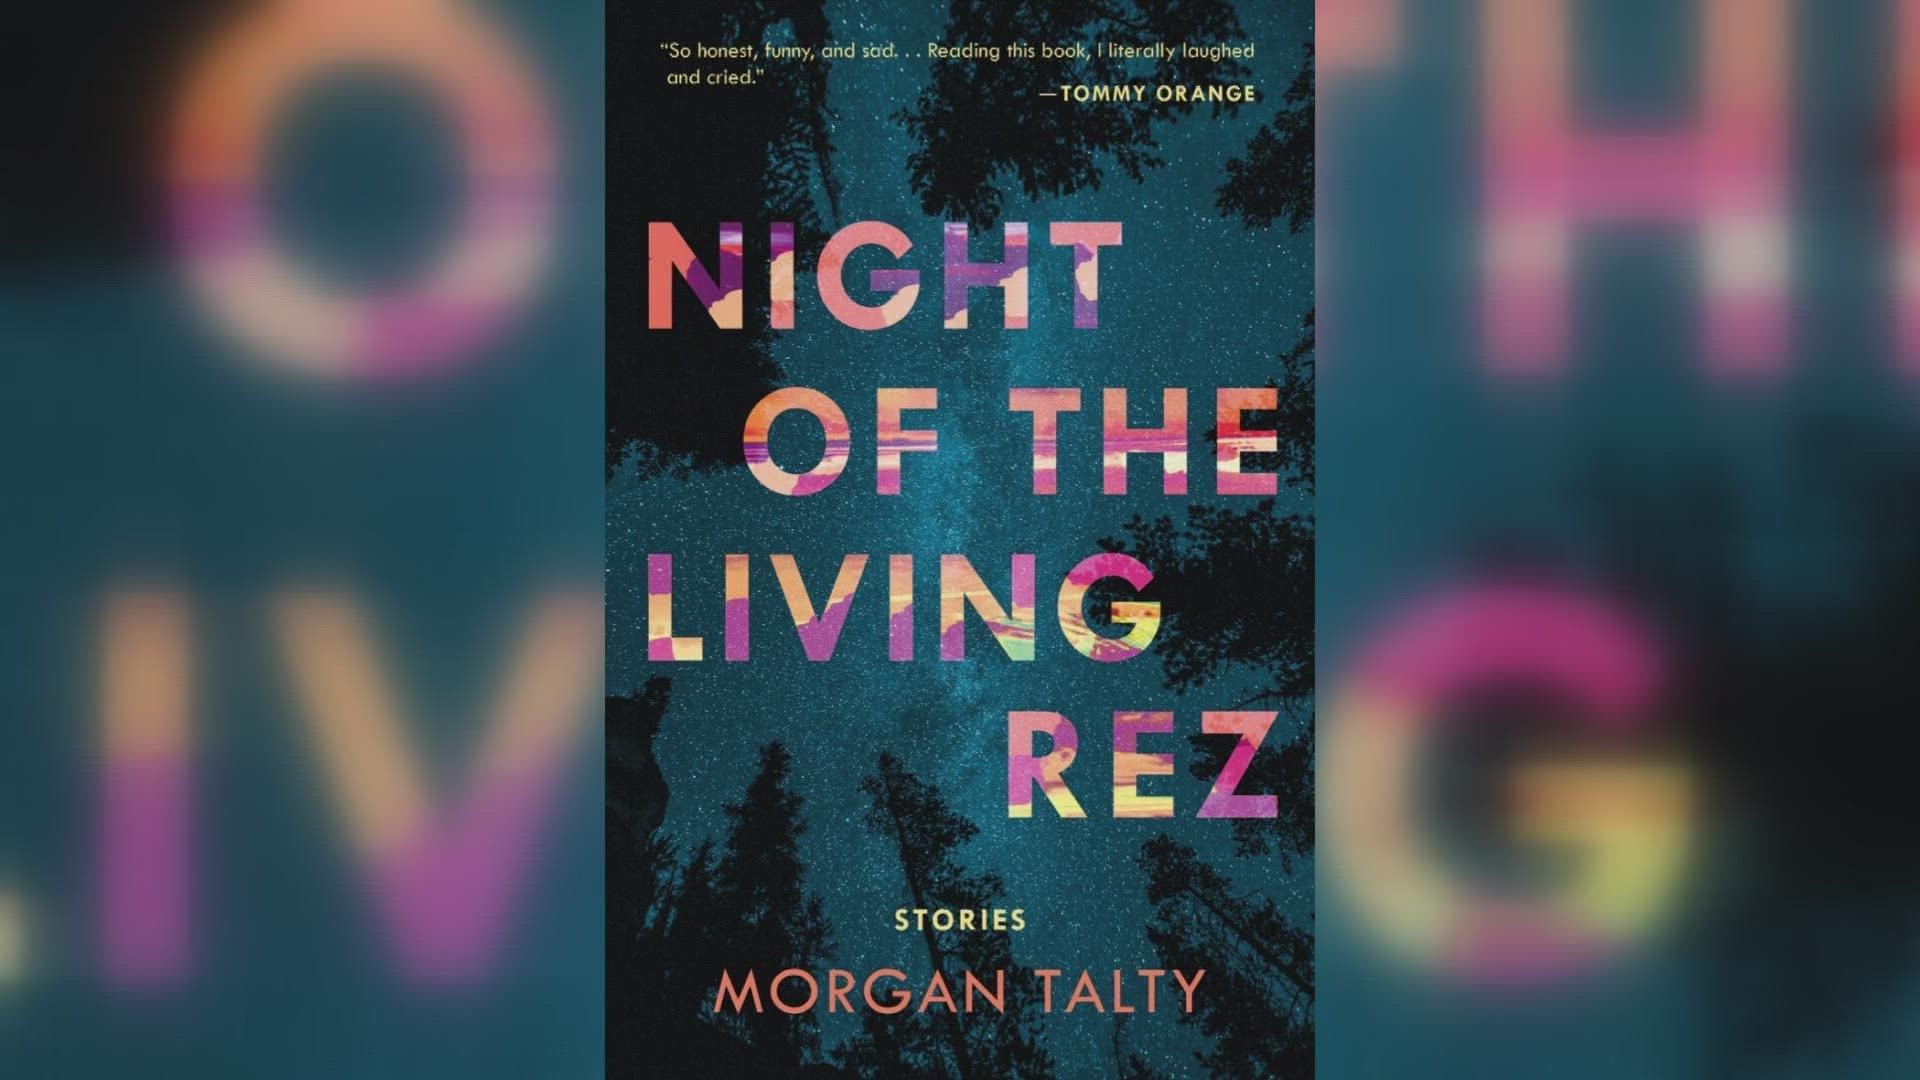 Maine writer debuts collection of short stories 'Night of the Living Rez' |  